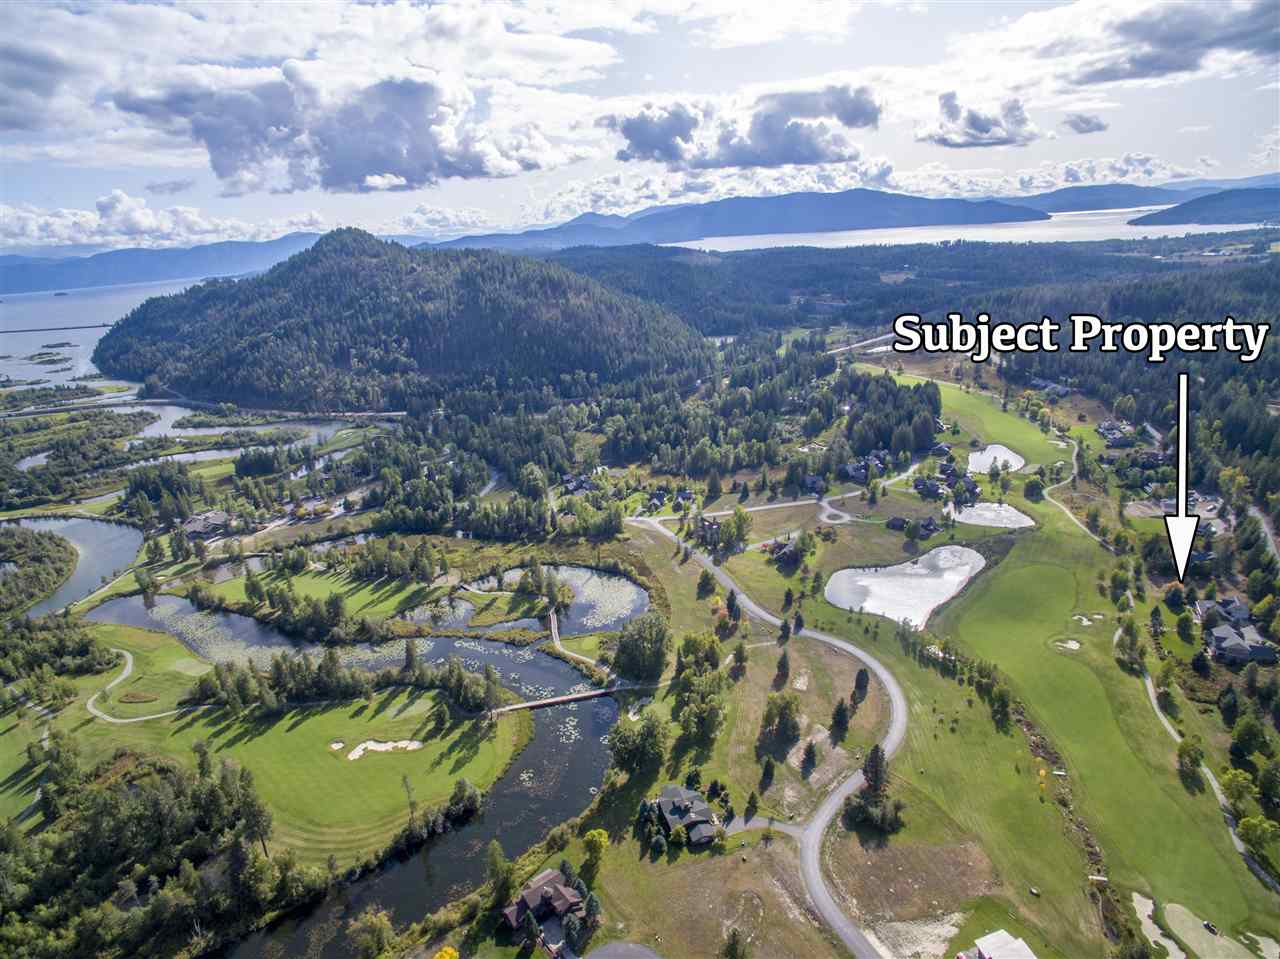 Land for sale in Sandpoint, Idaho, 20193017